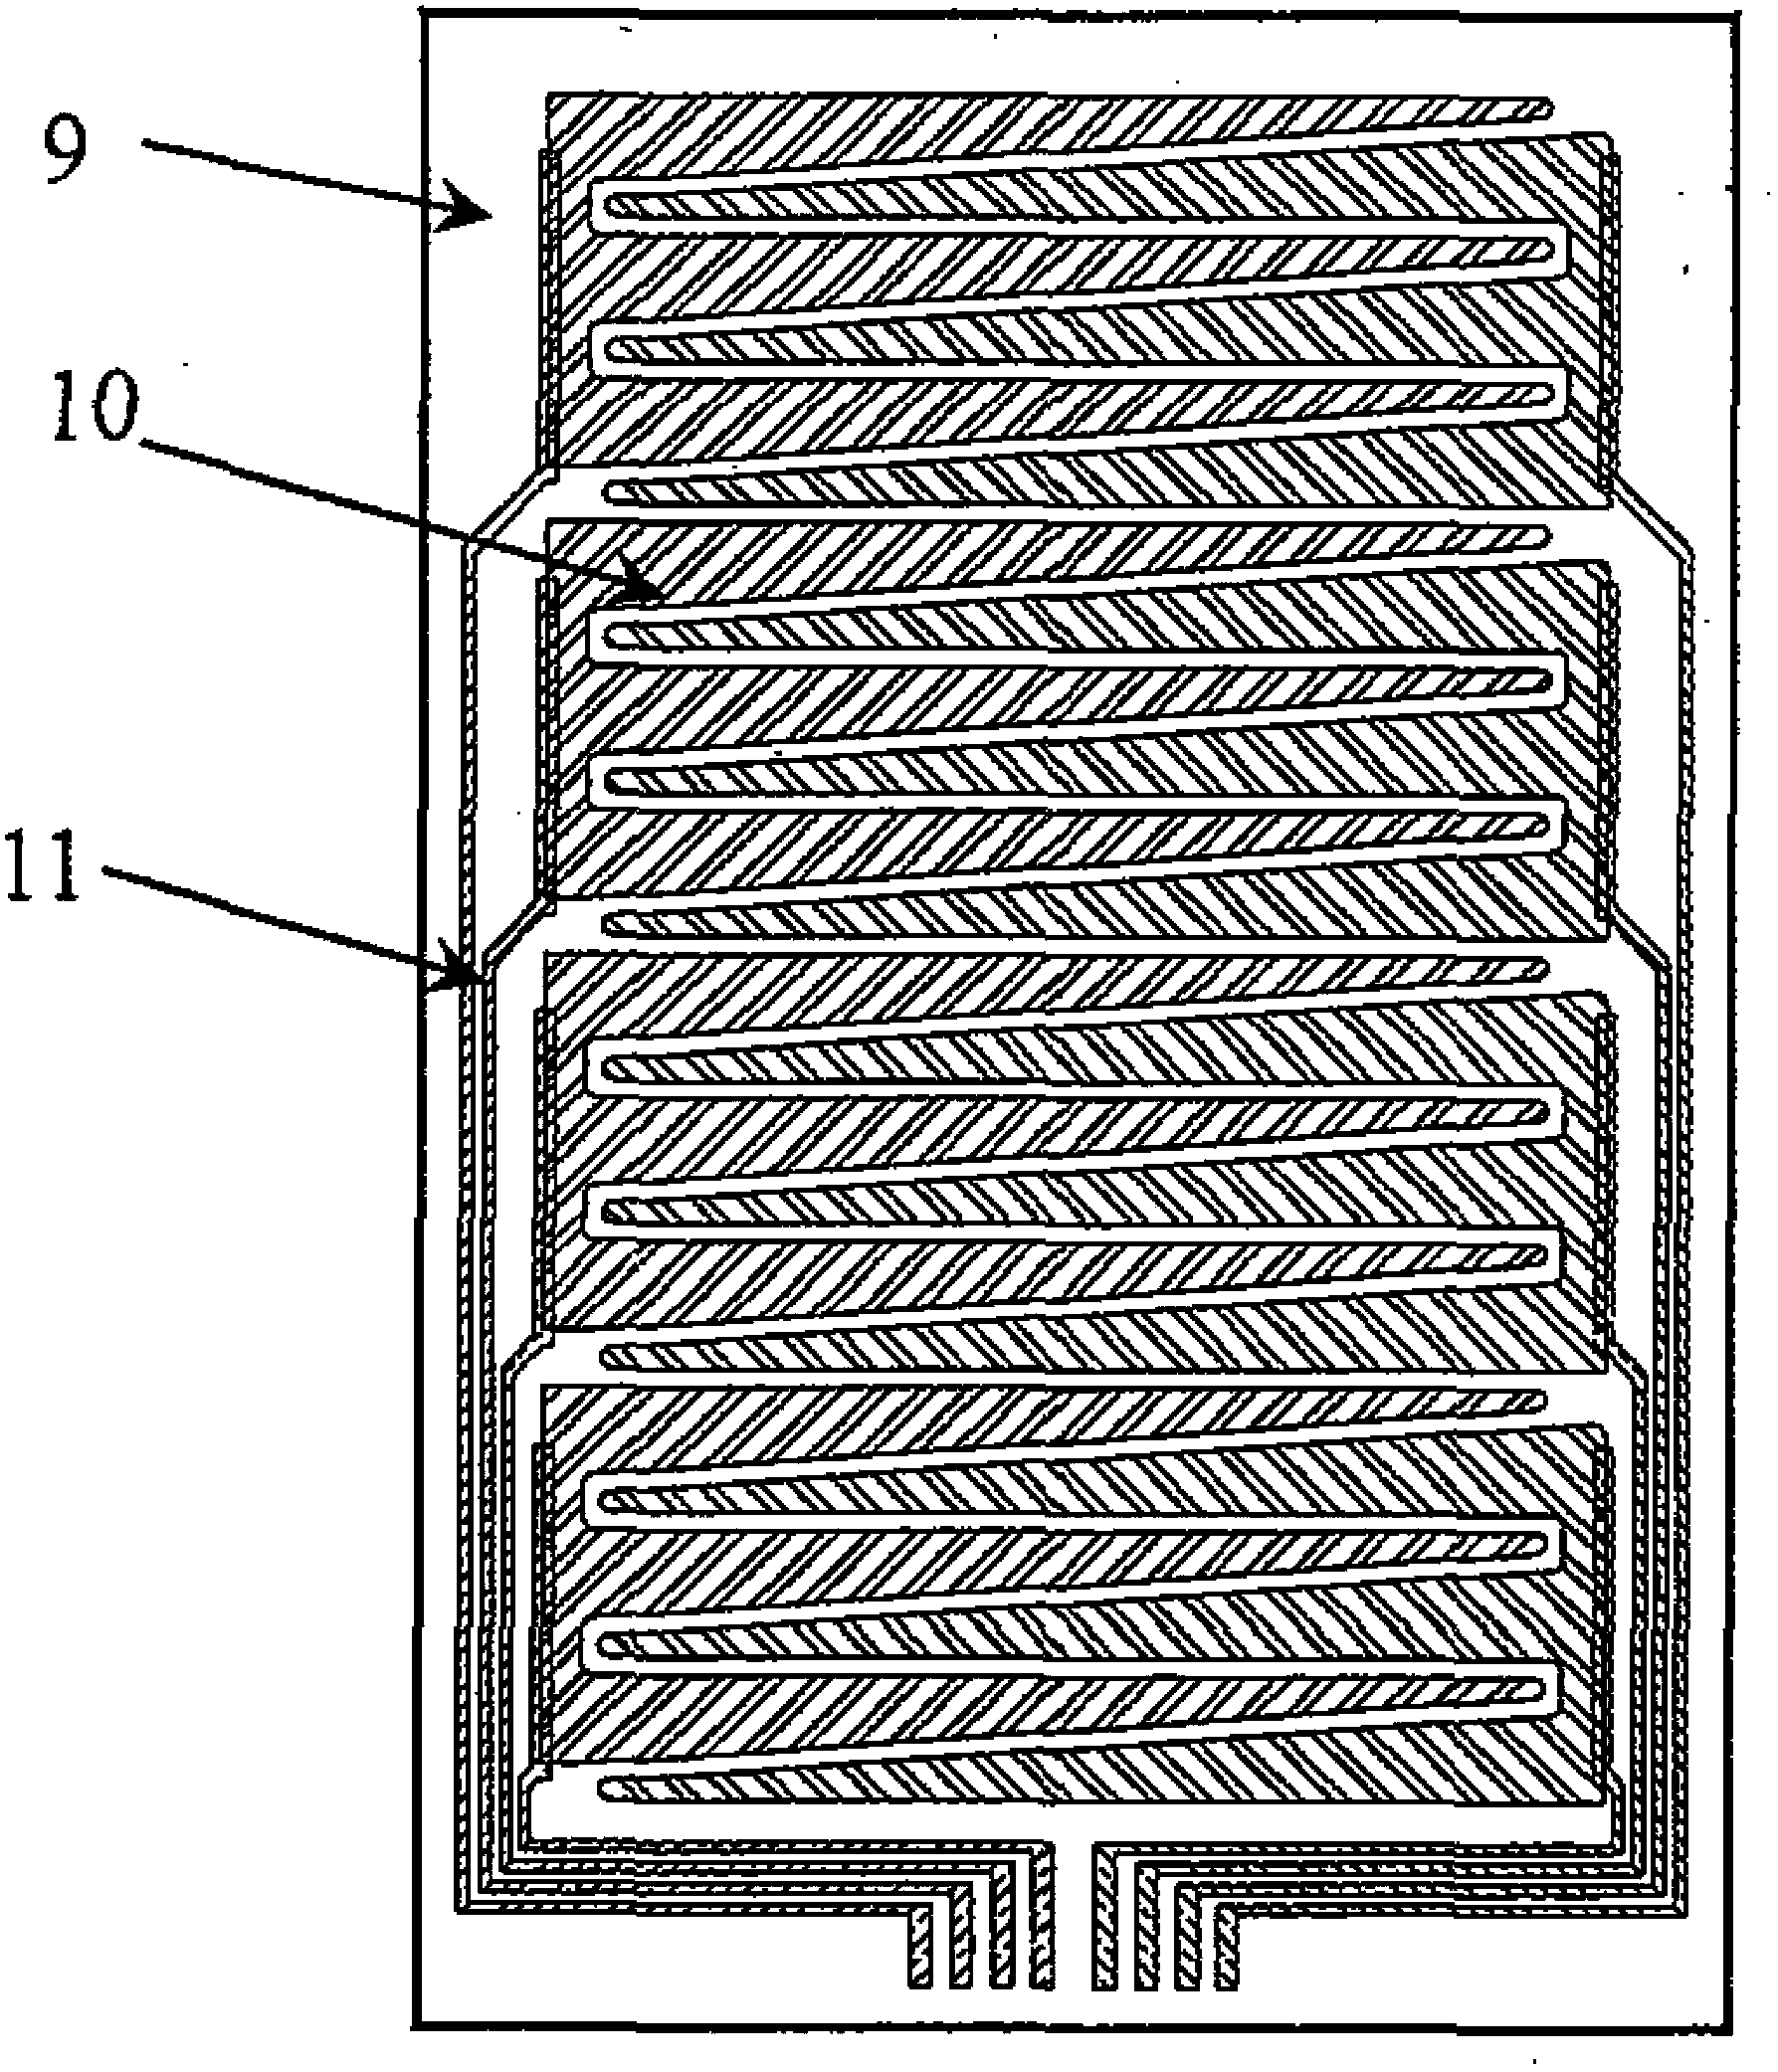 Capacitive touch screen and single-layer wiring electrode array